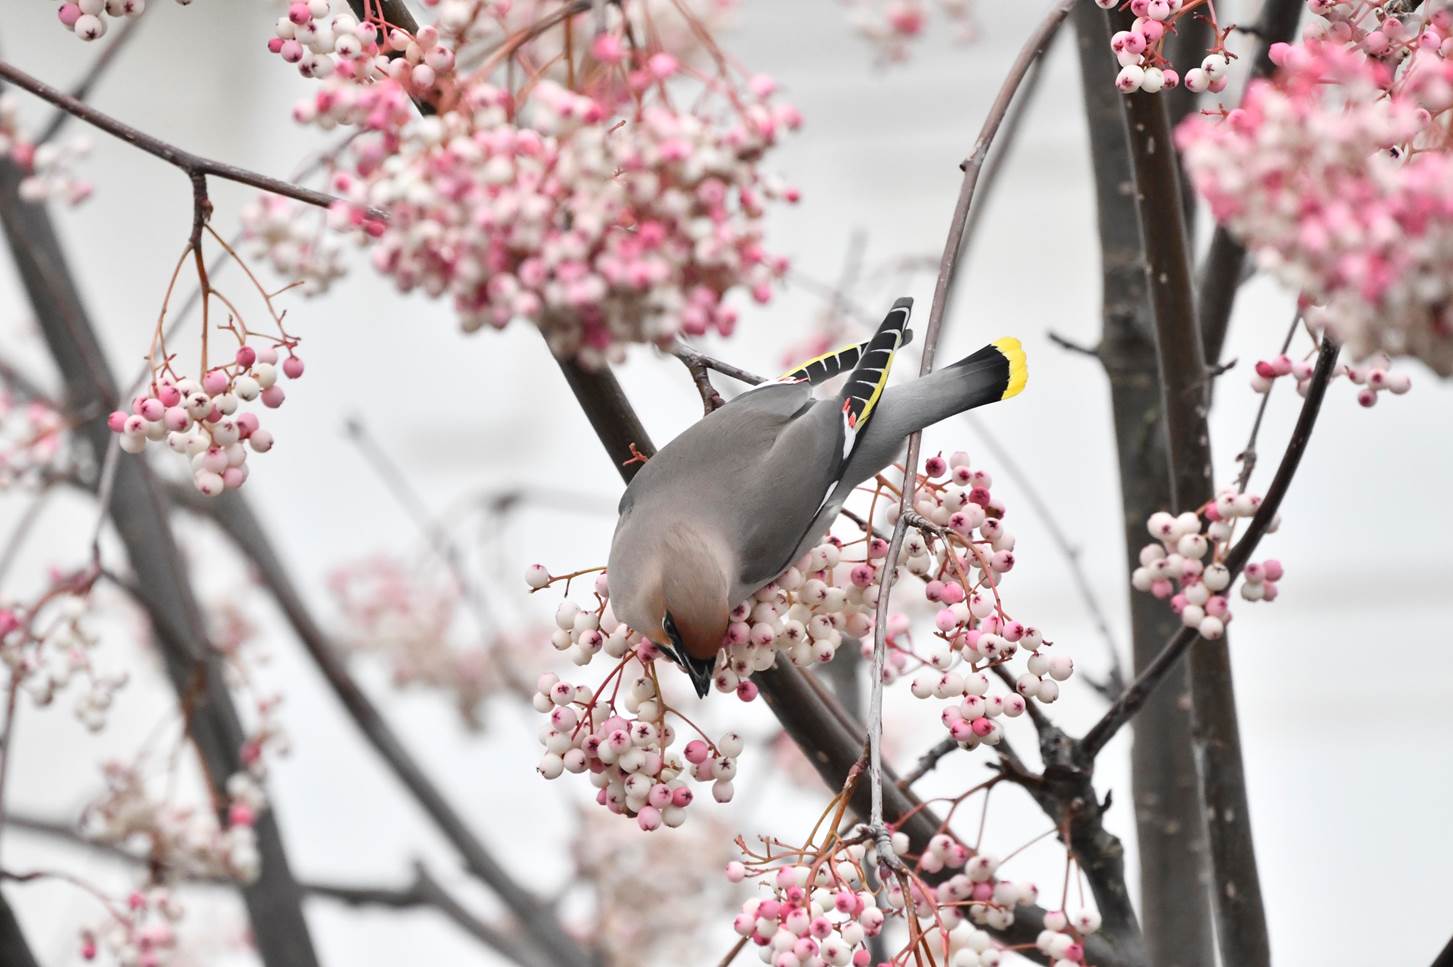 A bird on a tree branch with pink flowers

Description automatically generated